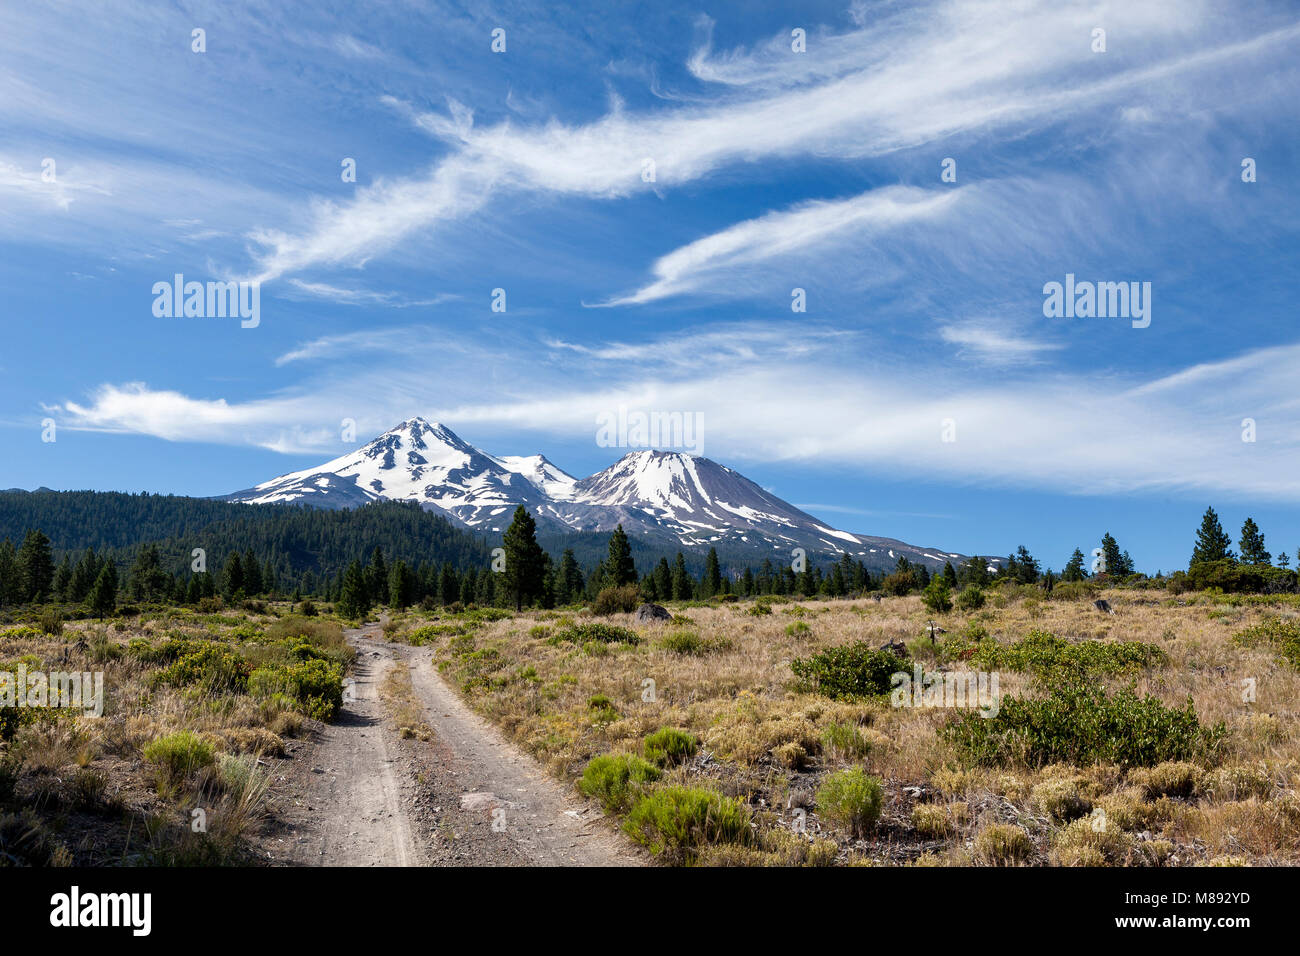 CA02861-00...CALIFORNIA - Bolam Road and Mount Shasta in the Mount Shasta National Forest. Stock Photo